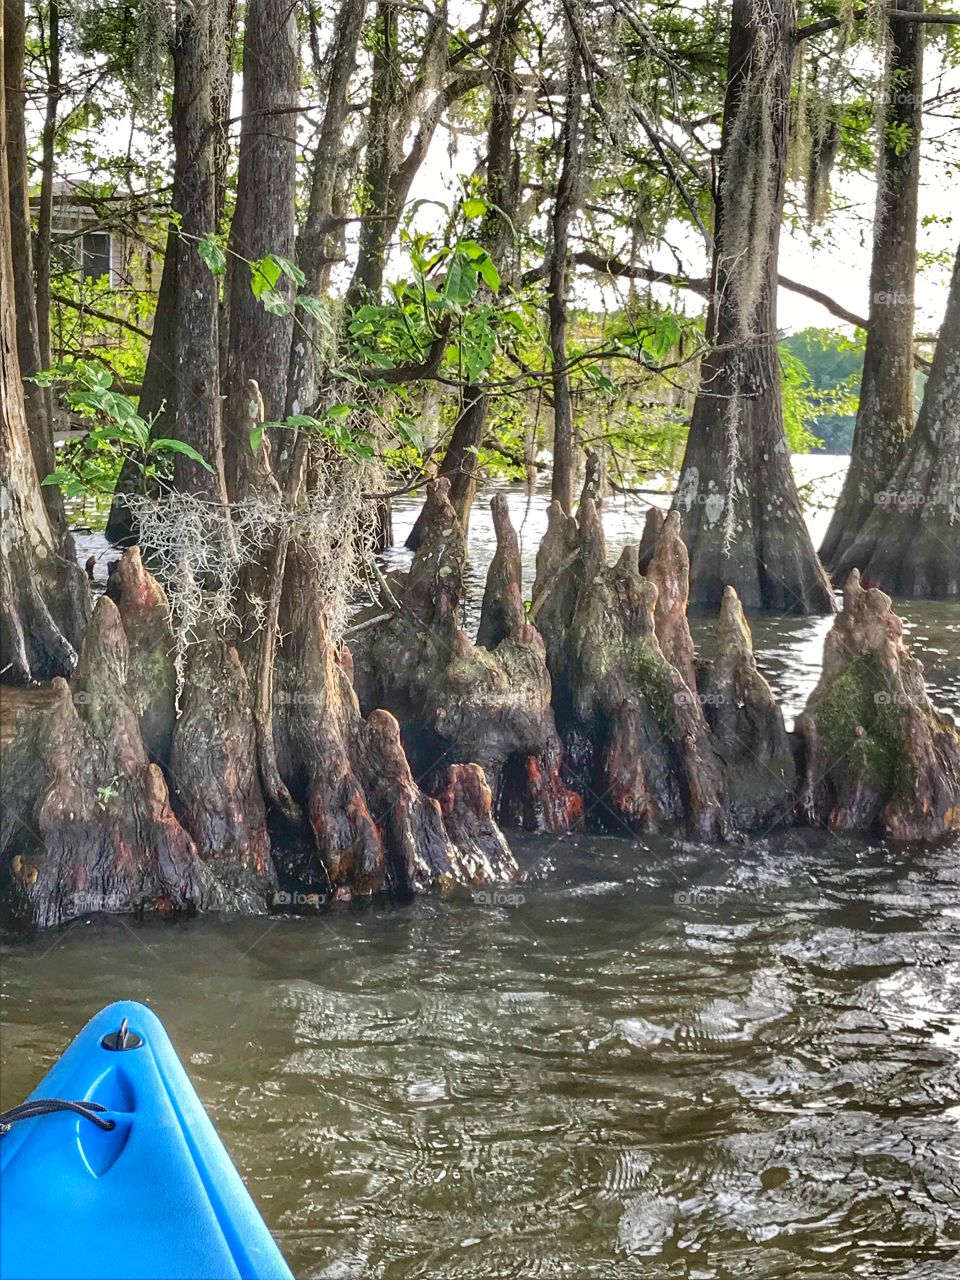 Beautiful view of Cypress Knees seen while paddling in a lake